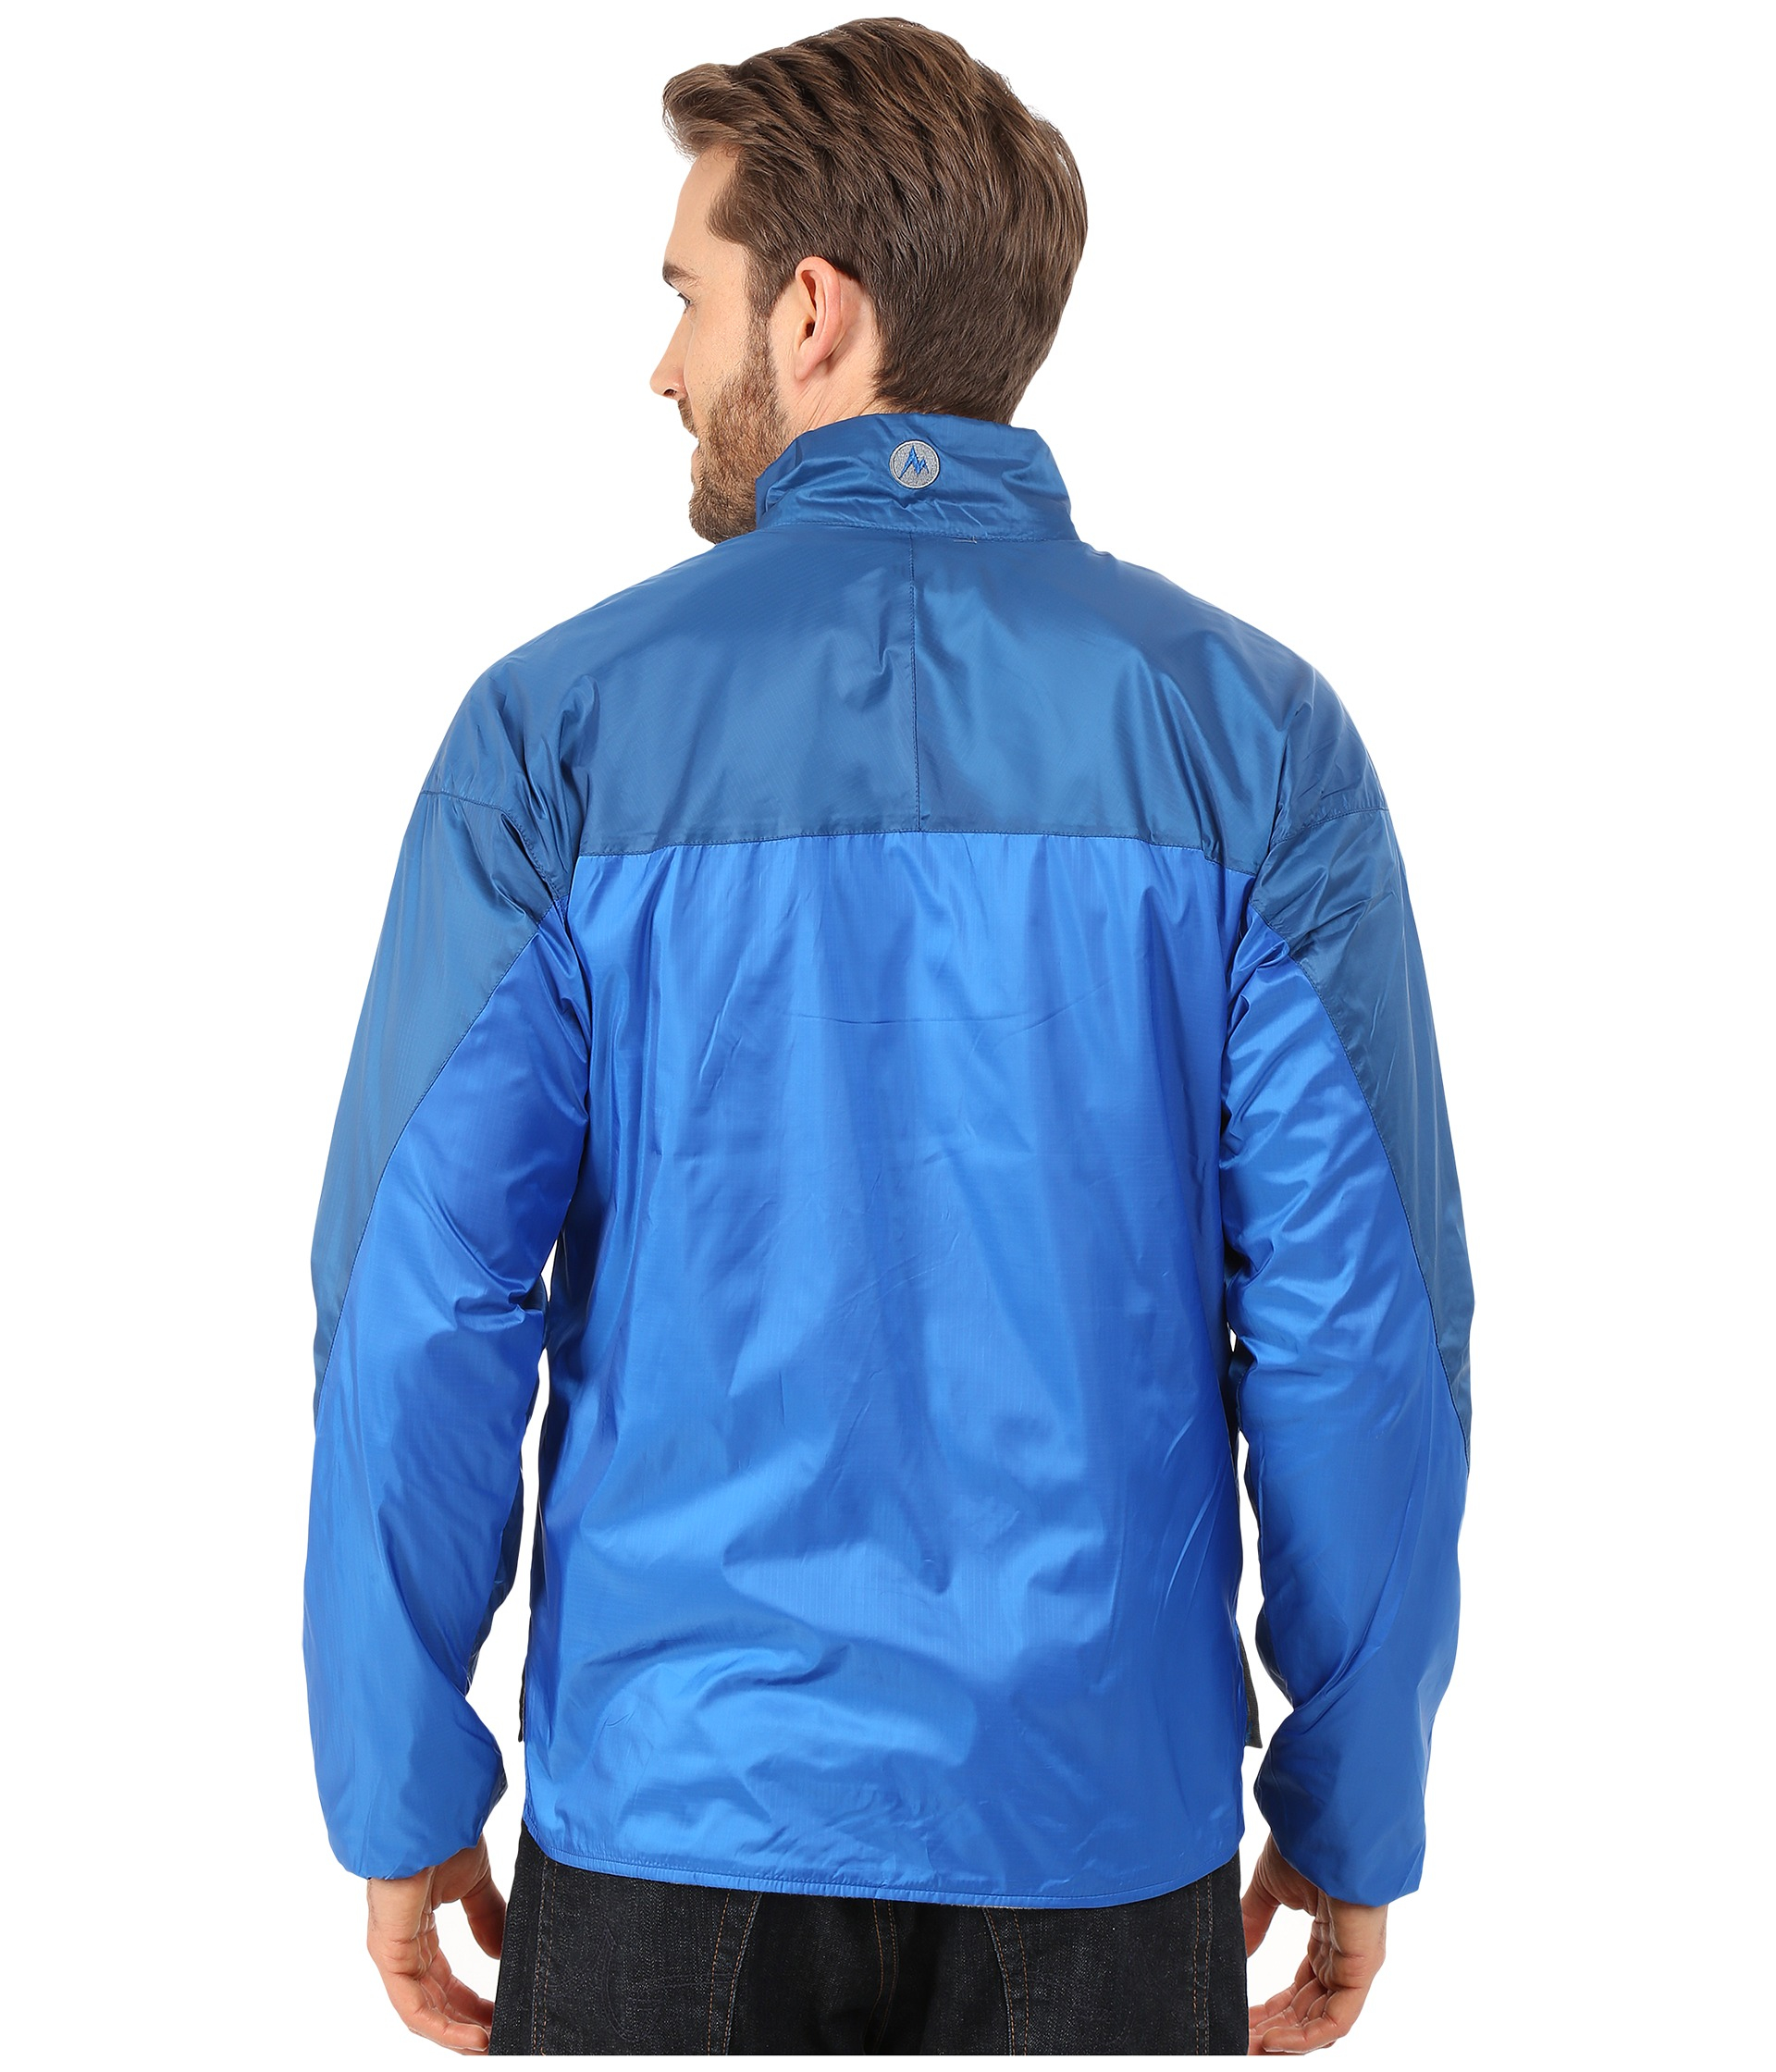 Lyst - Marmot Driclime Windshirt in Blue